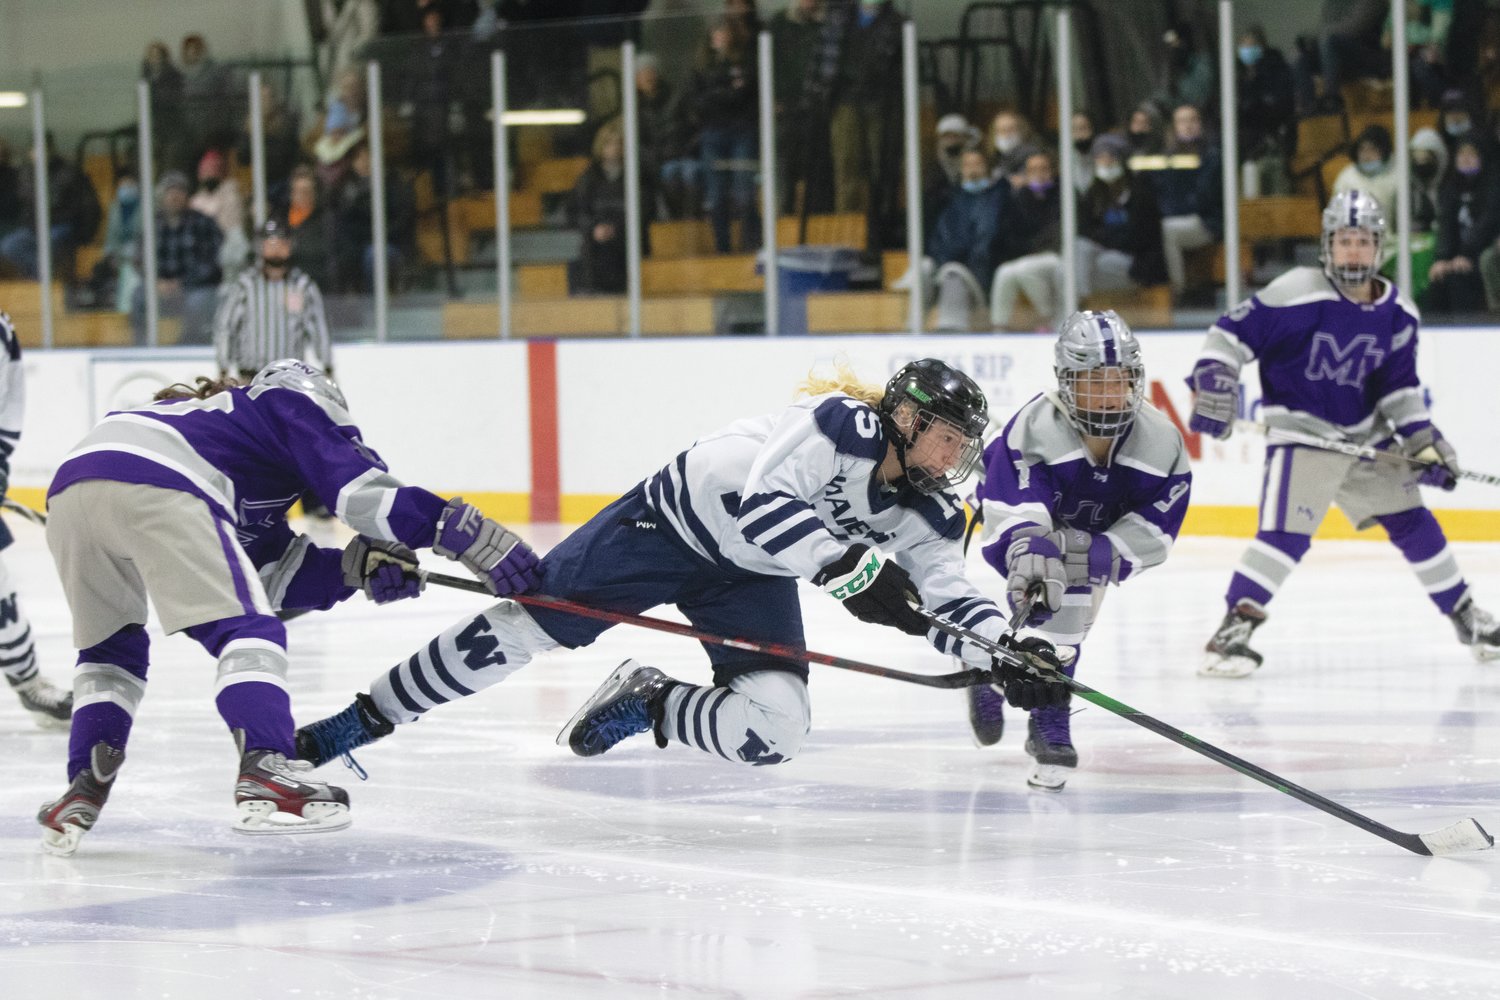 The Whalers had a pair of goals in a lass-second loss to the Vineyard from seventh-grade defenseman Mia Beaudette, who came up and dominated midway through the season.